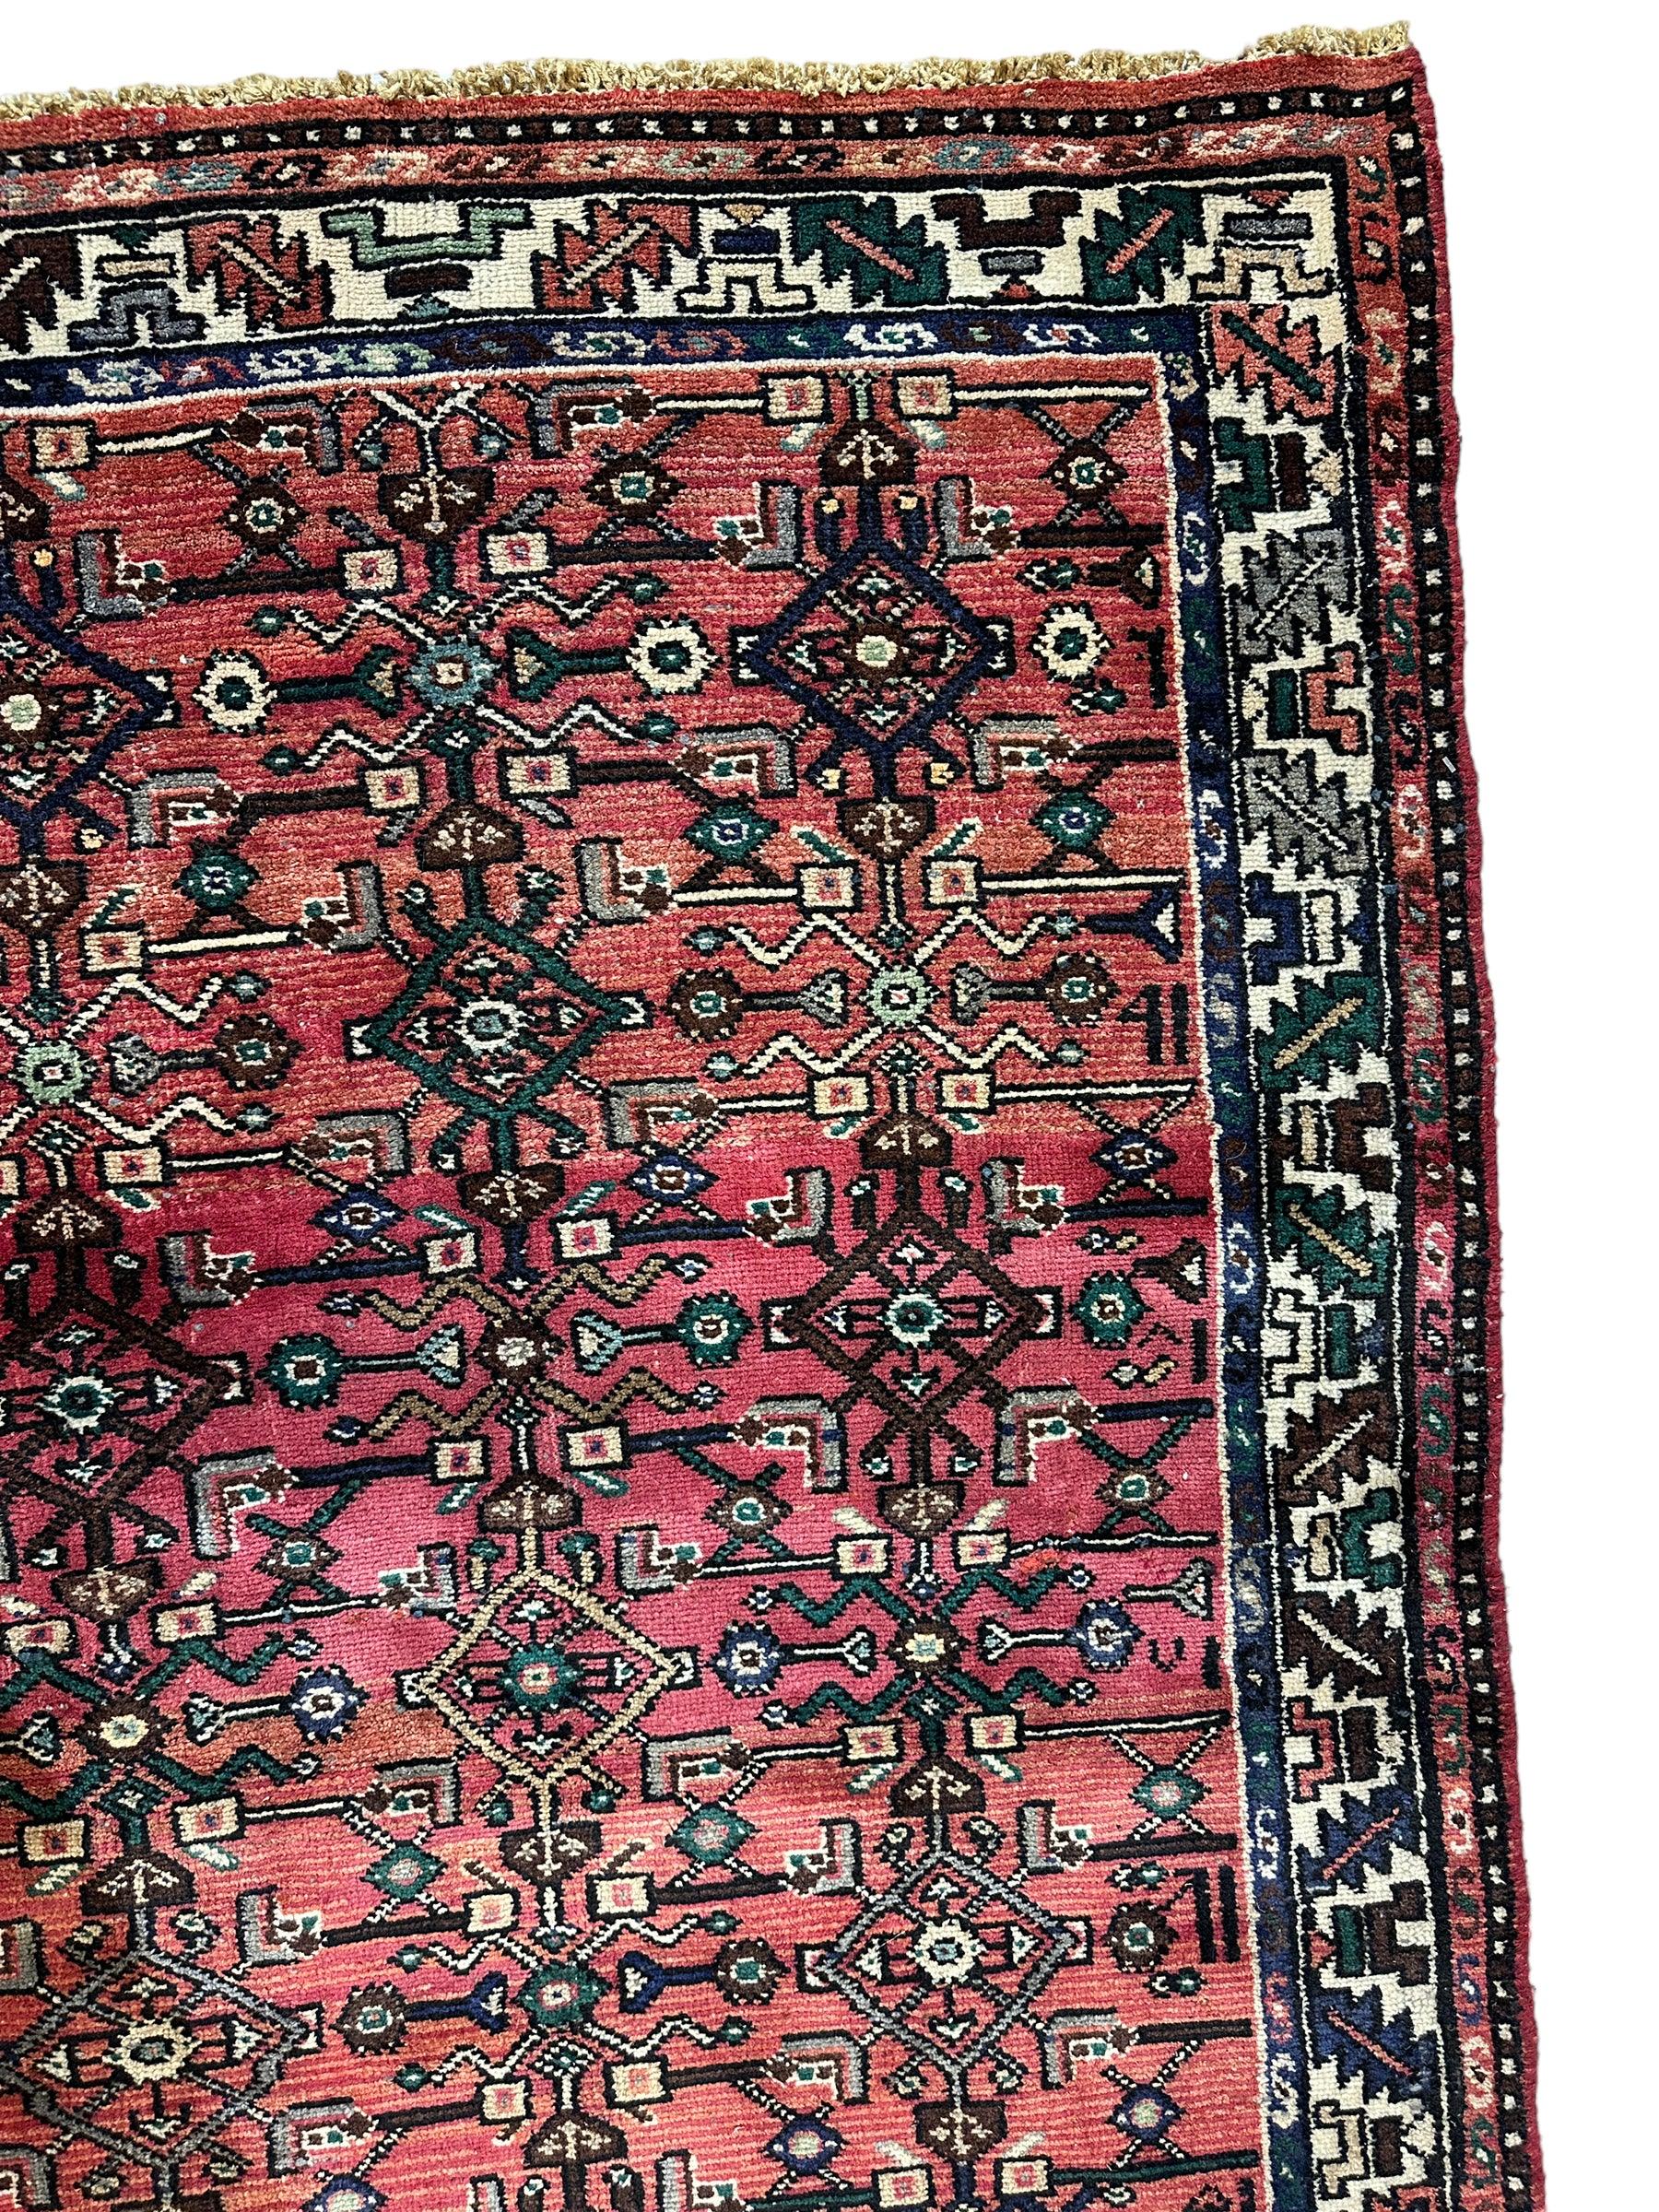 Hand Knotted Persian Hamadan Wide Runner Rug 3’6” x 9’10”